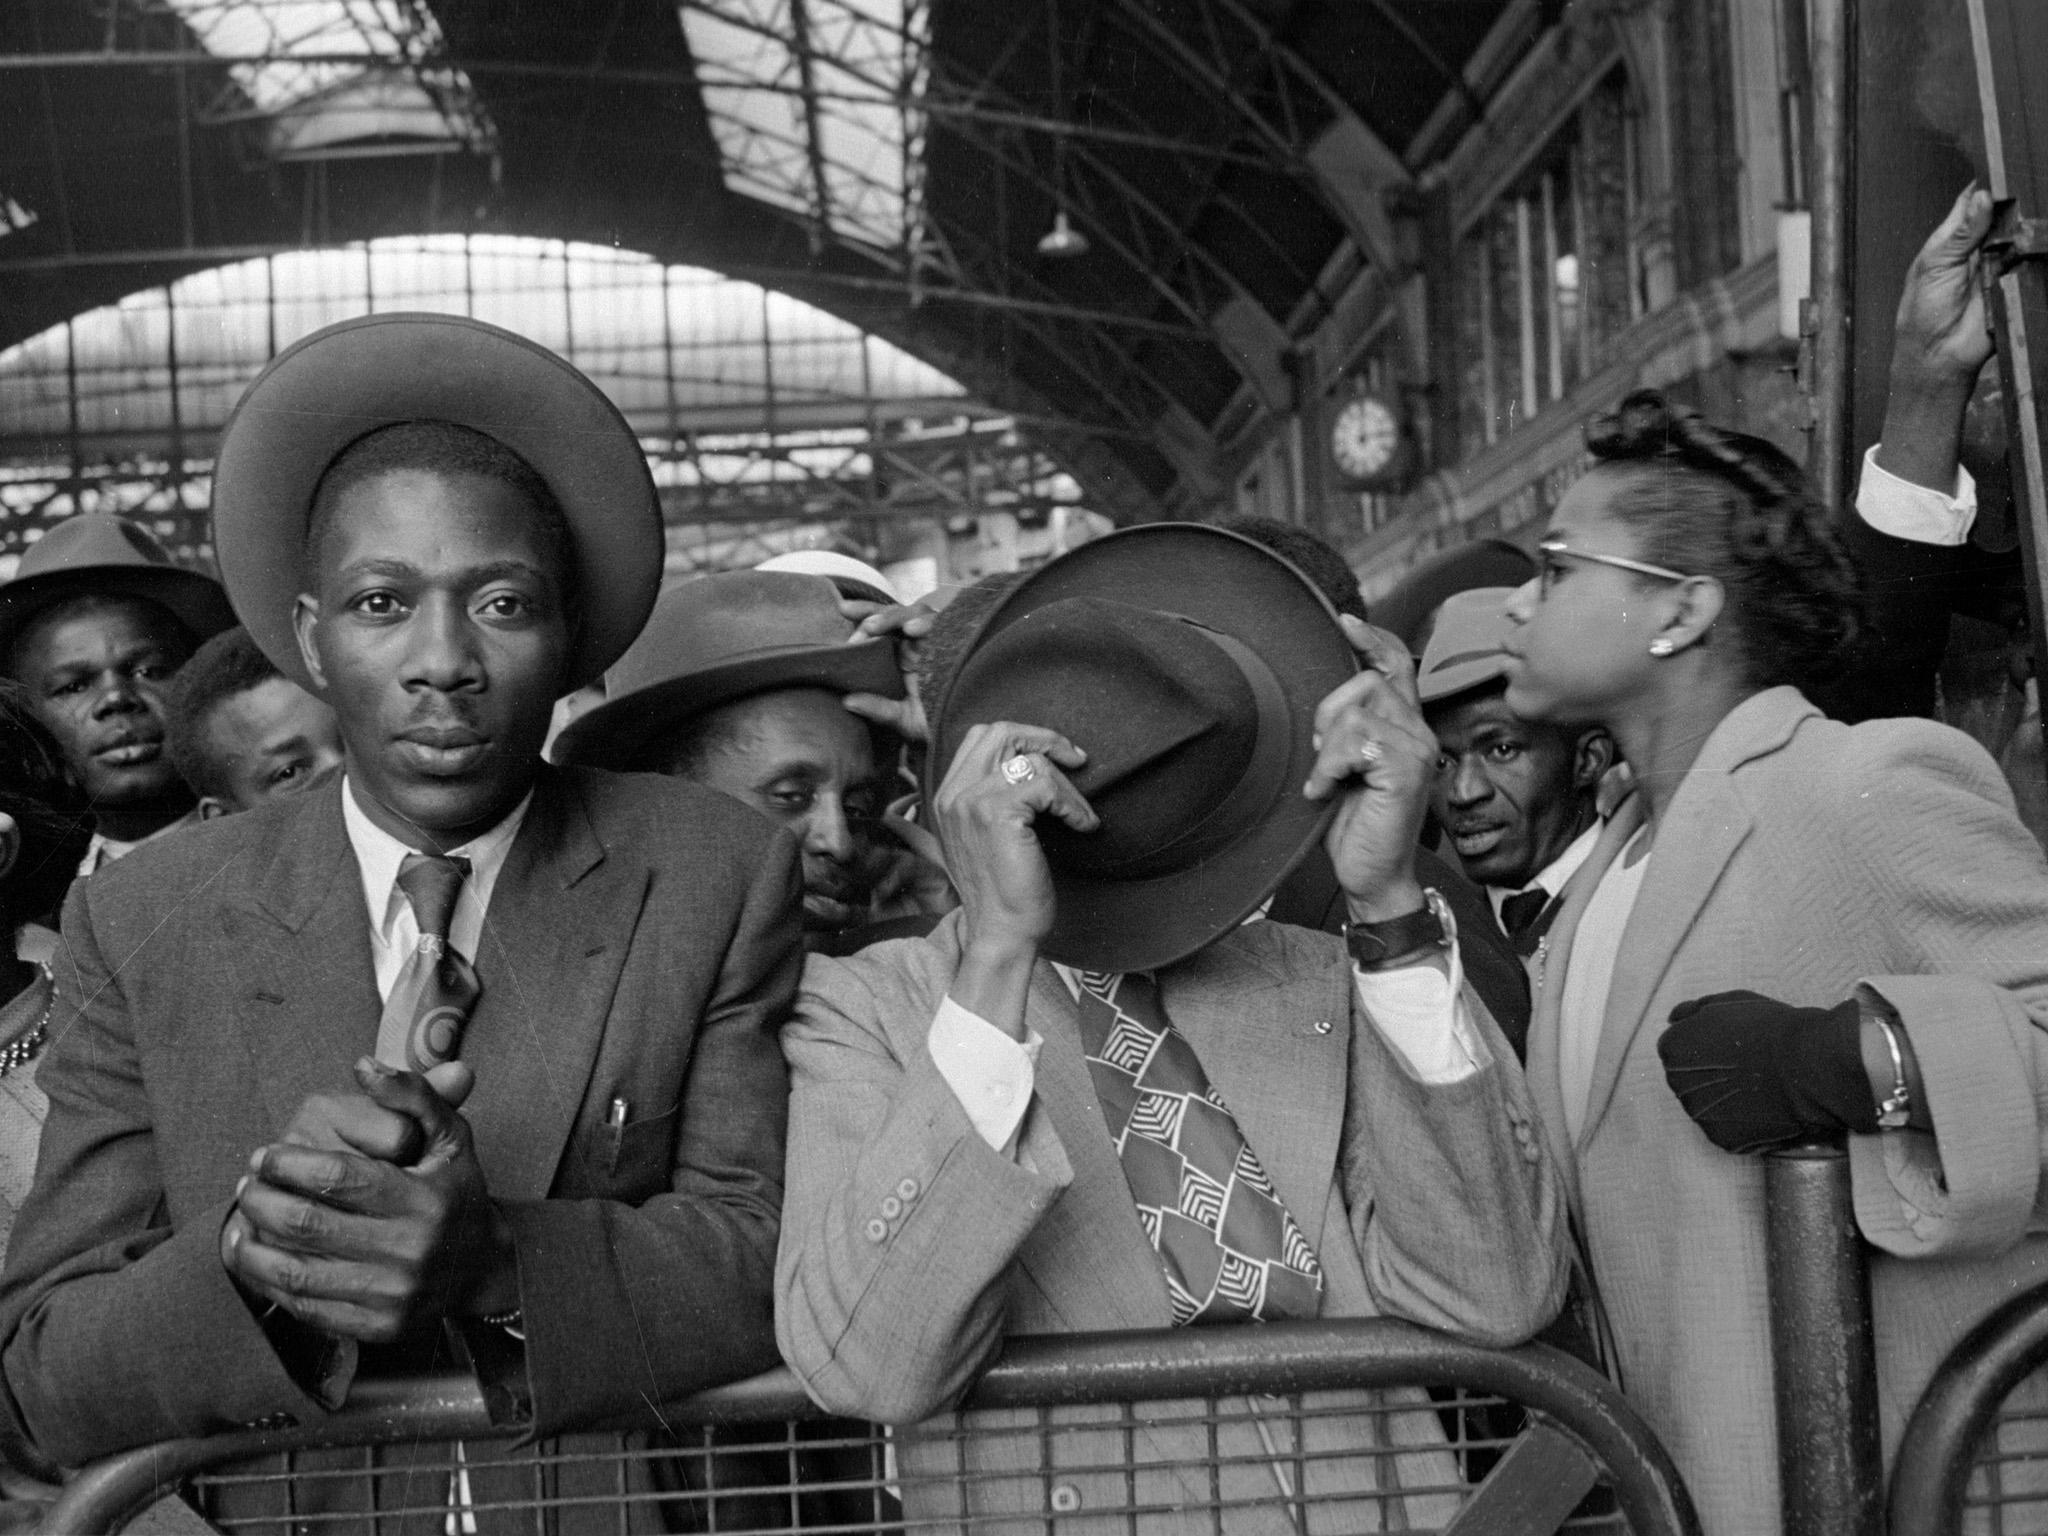 Home secretary apologises to more Windrush citizens – but campaigners warn many victims still suffering